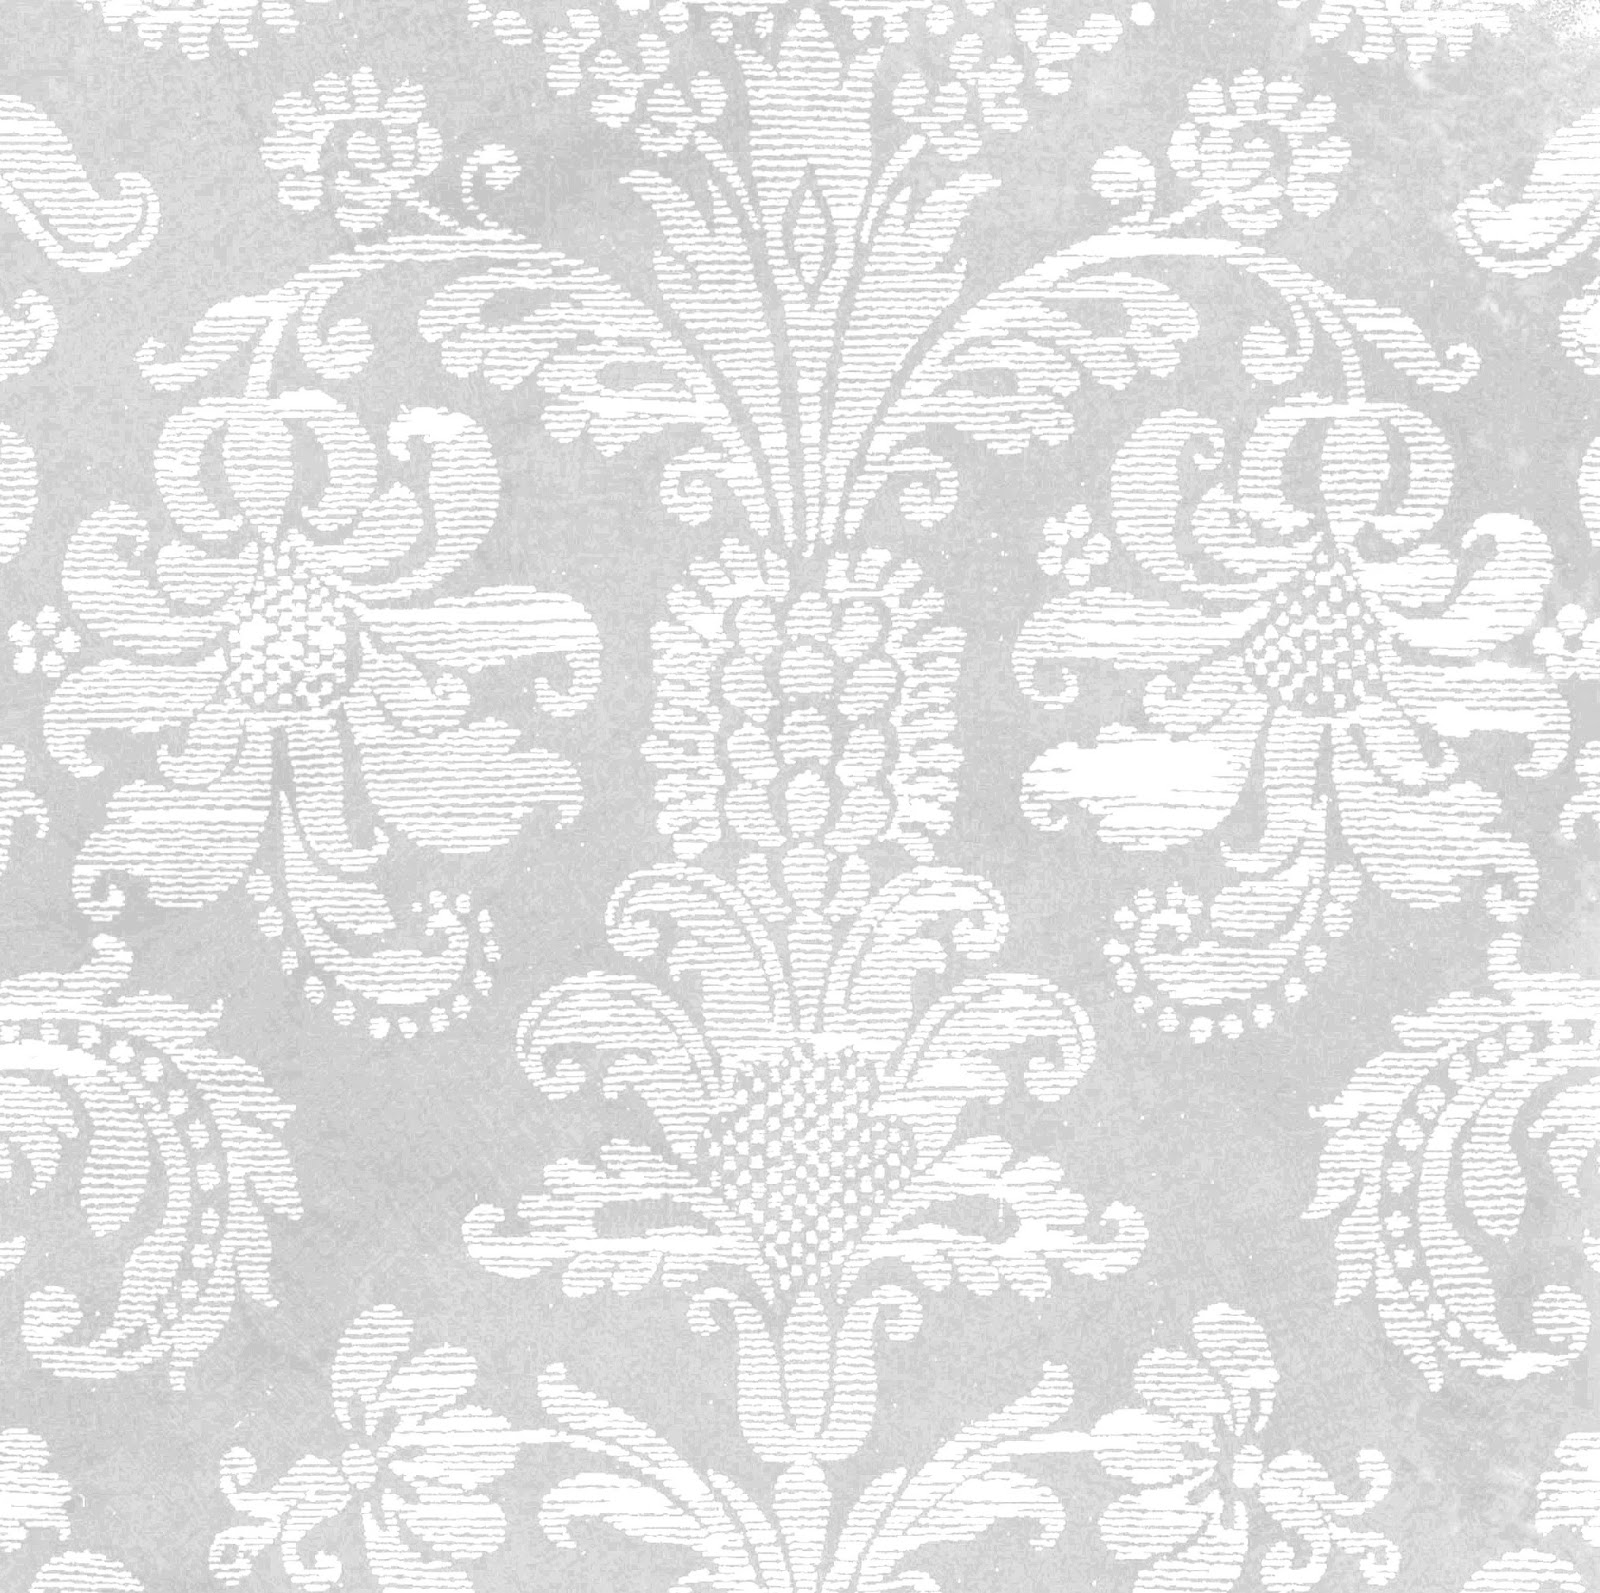 Mint Green Damask Wallpaper Silver And White